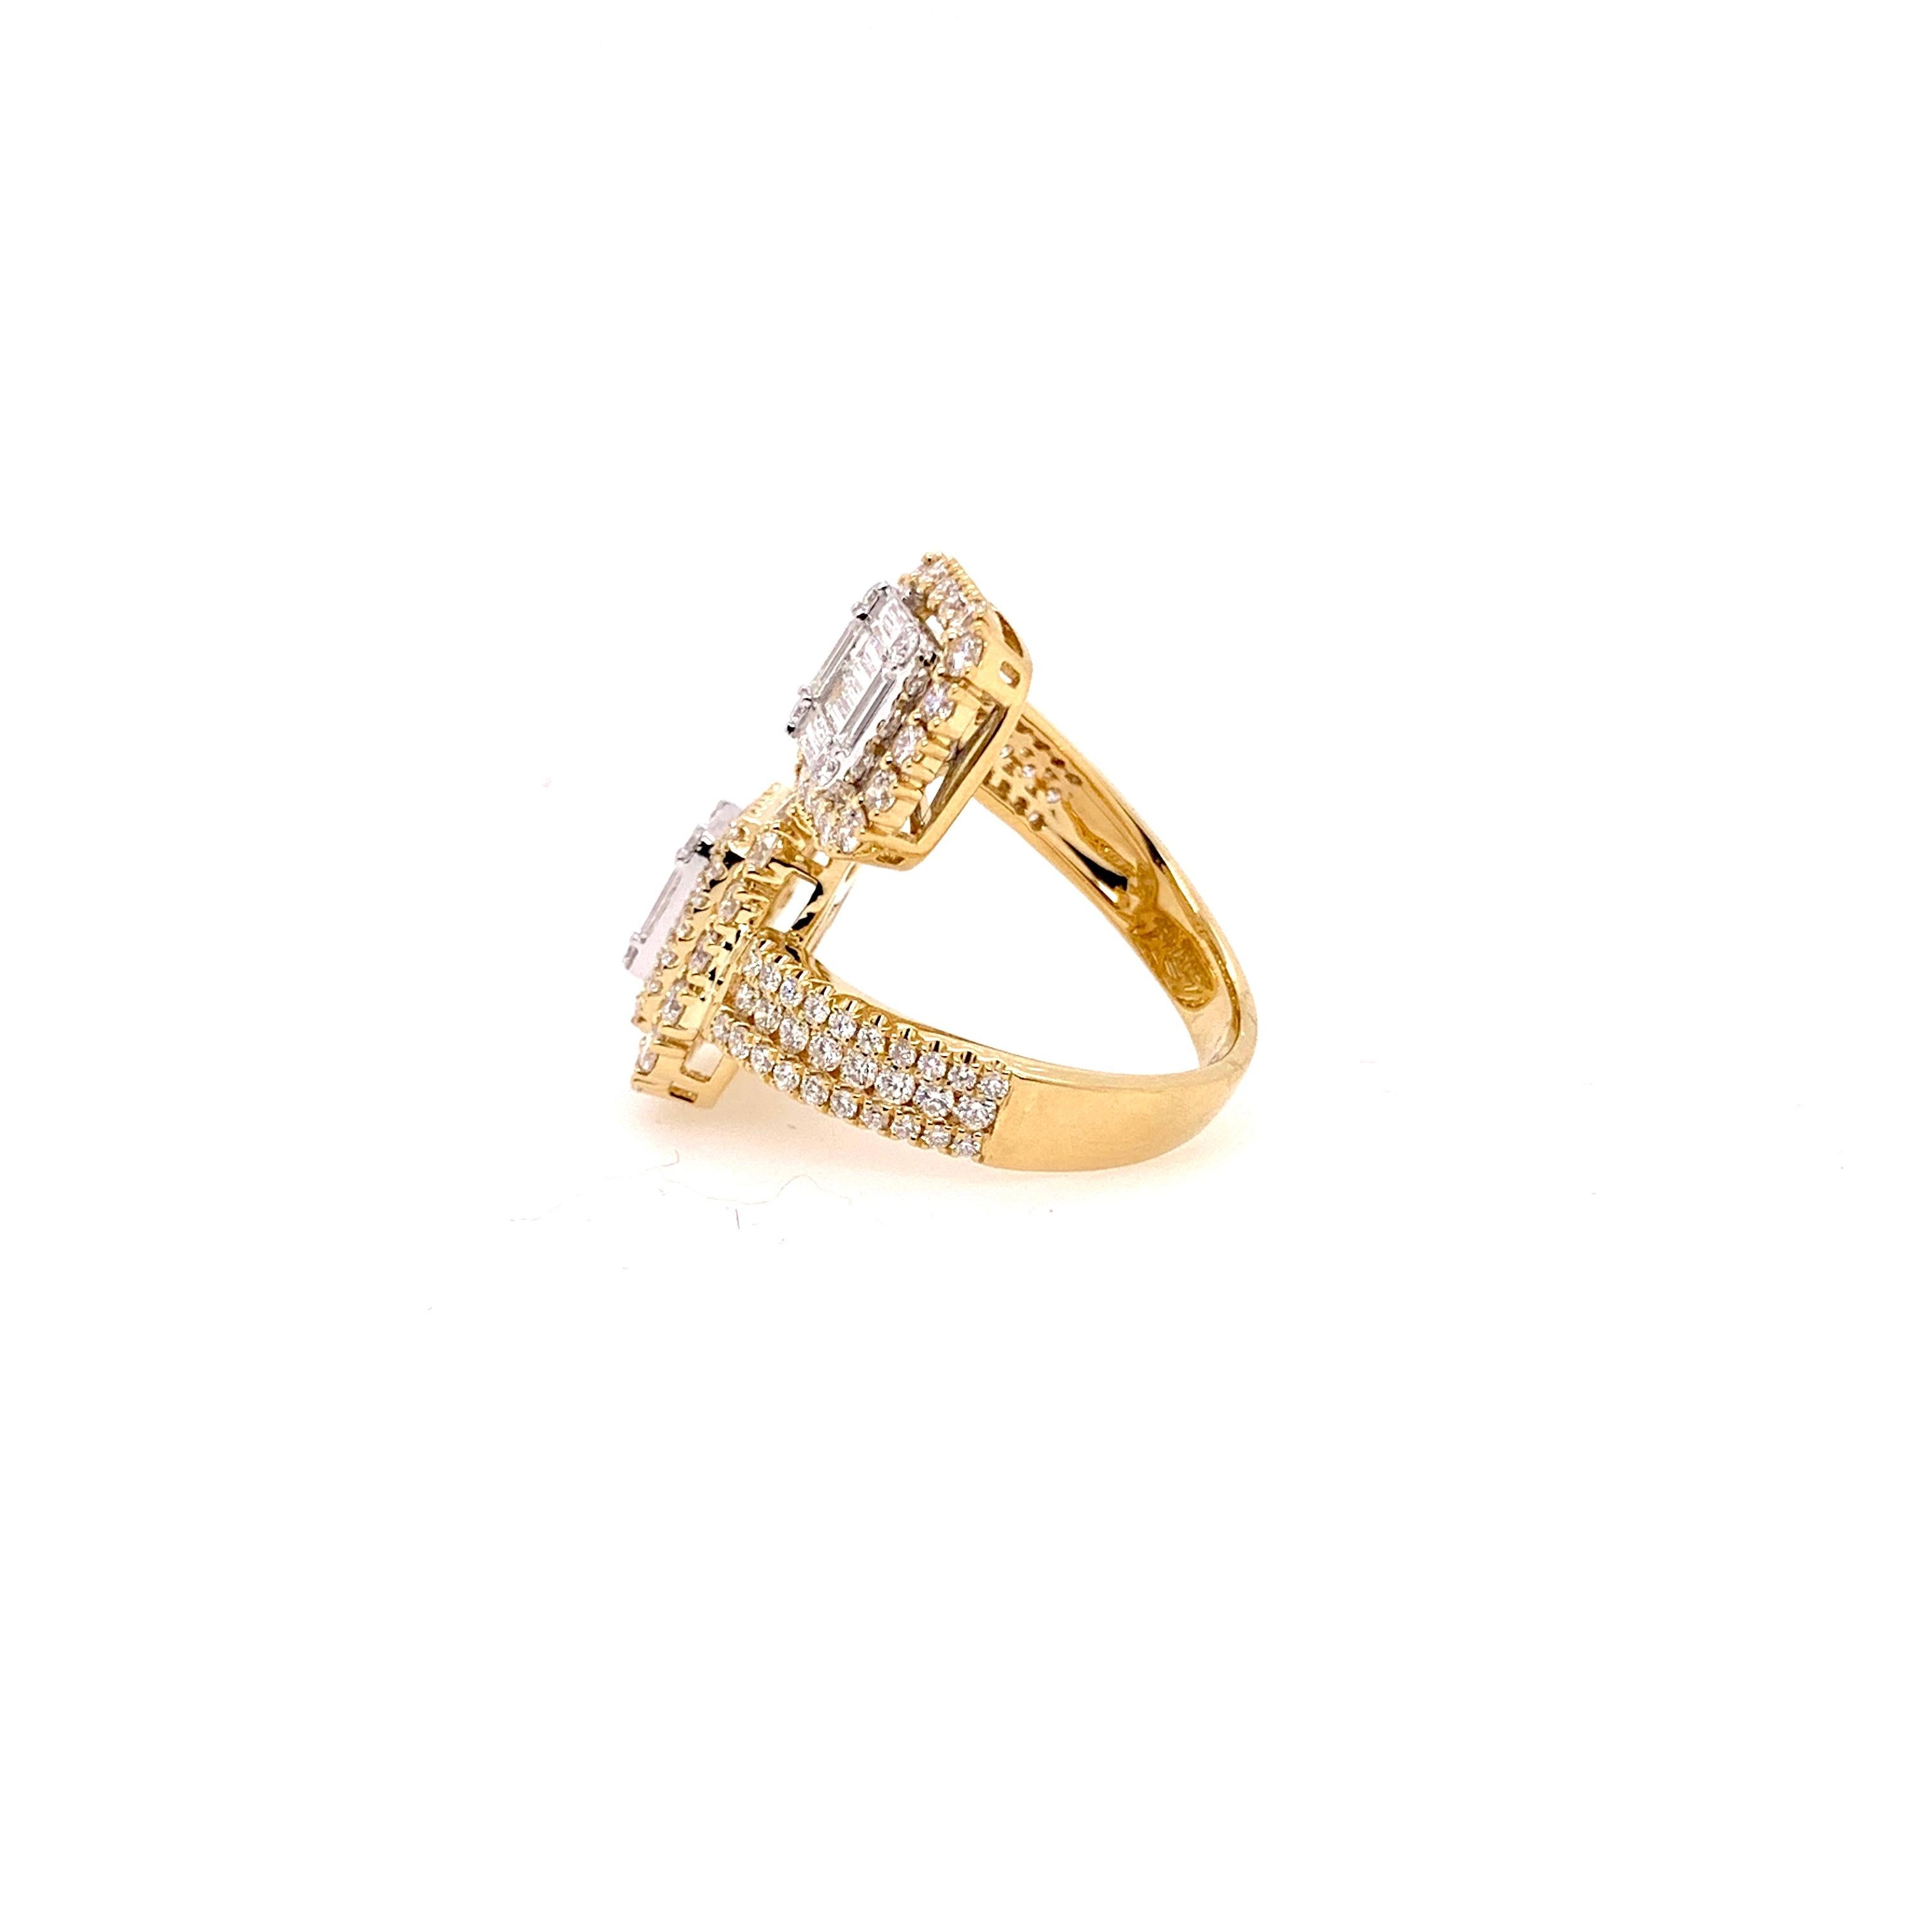 An unusual diamond bypass ring that will captivate everyone's attention.   Uniquely made in 18k yellow gold, it has a total of 3.55 cts of round diamonds and diamond baguettes.  This statement piece will be thoroughly enjoyed in any jewelry